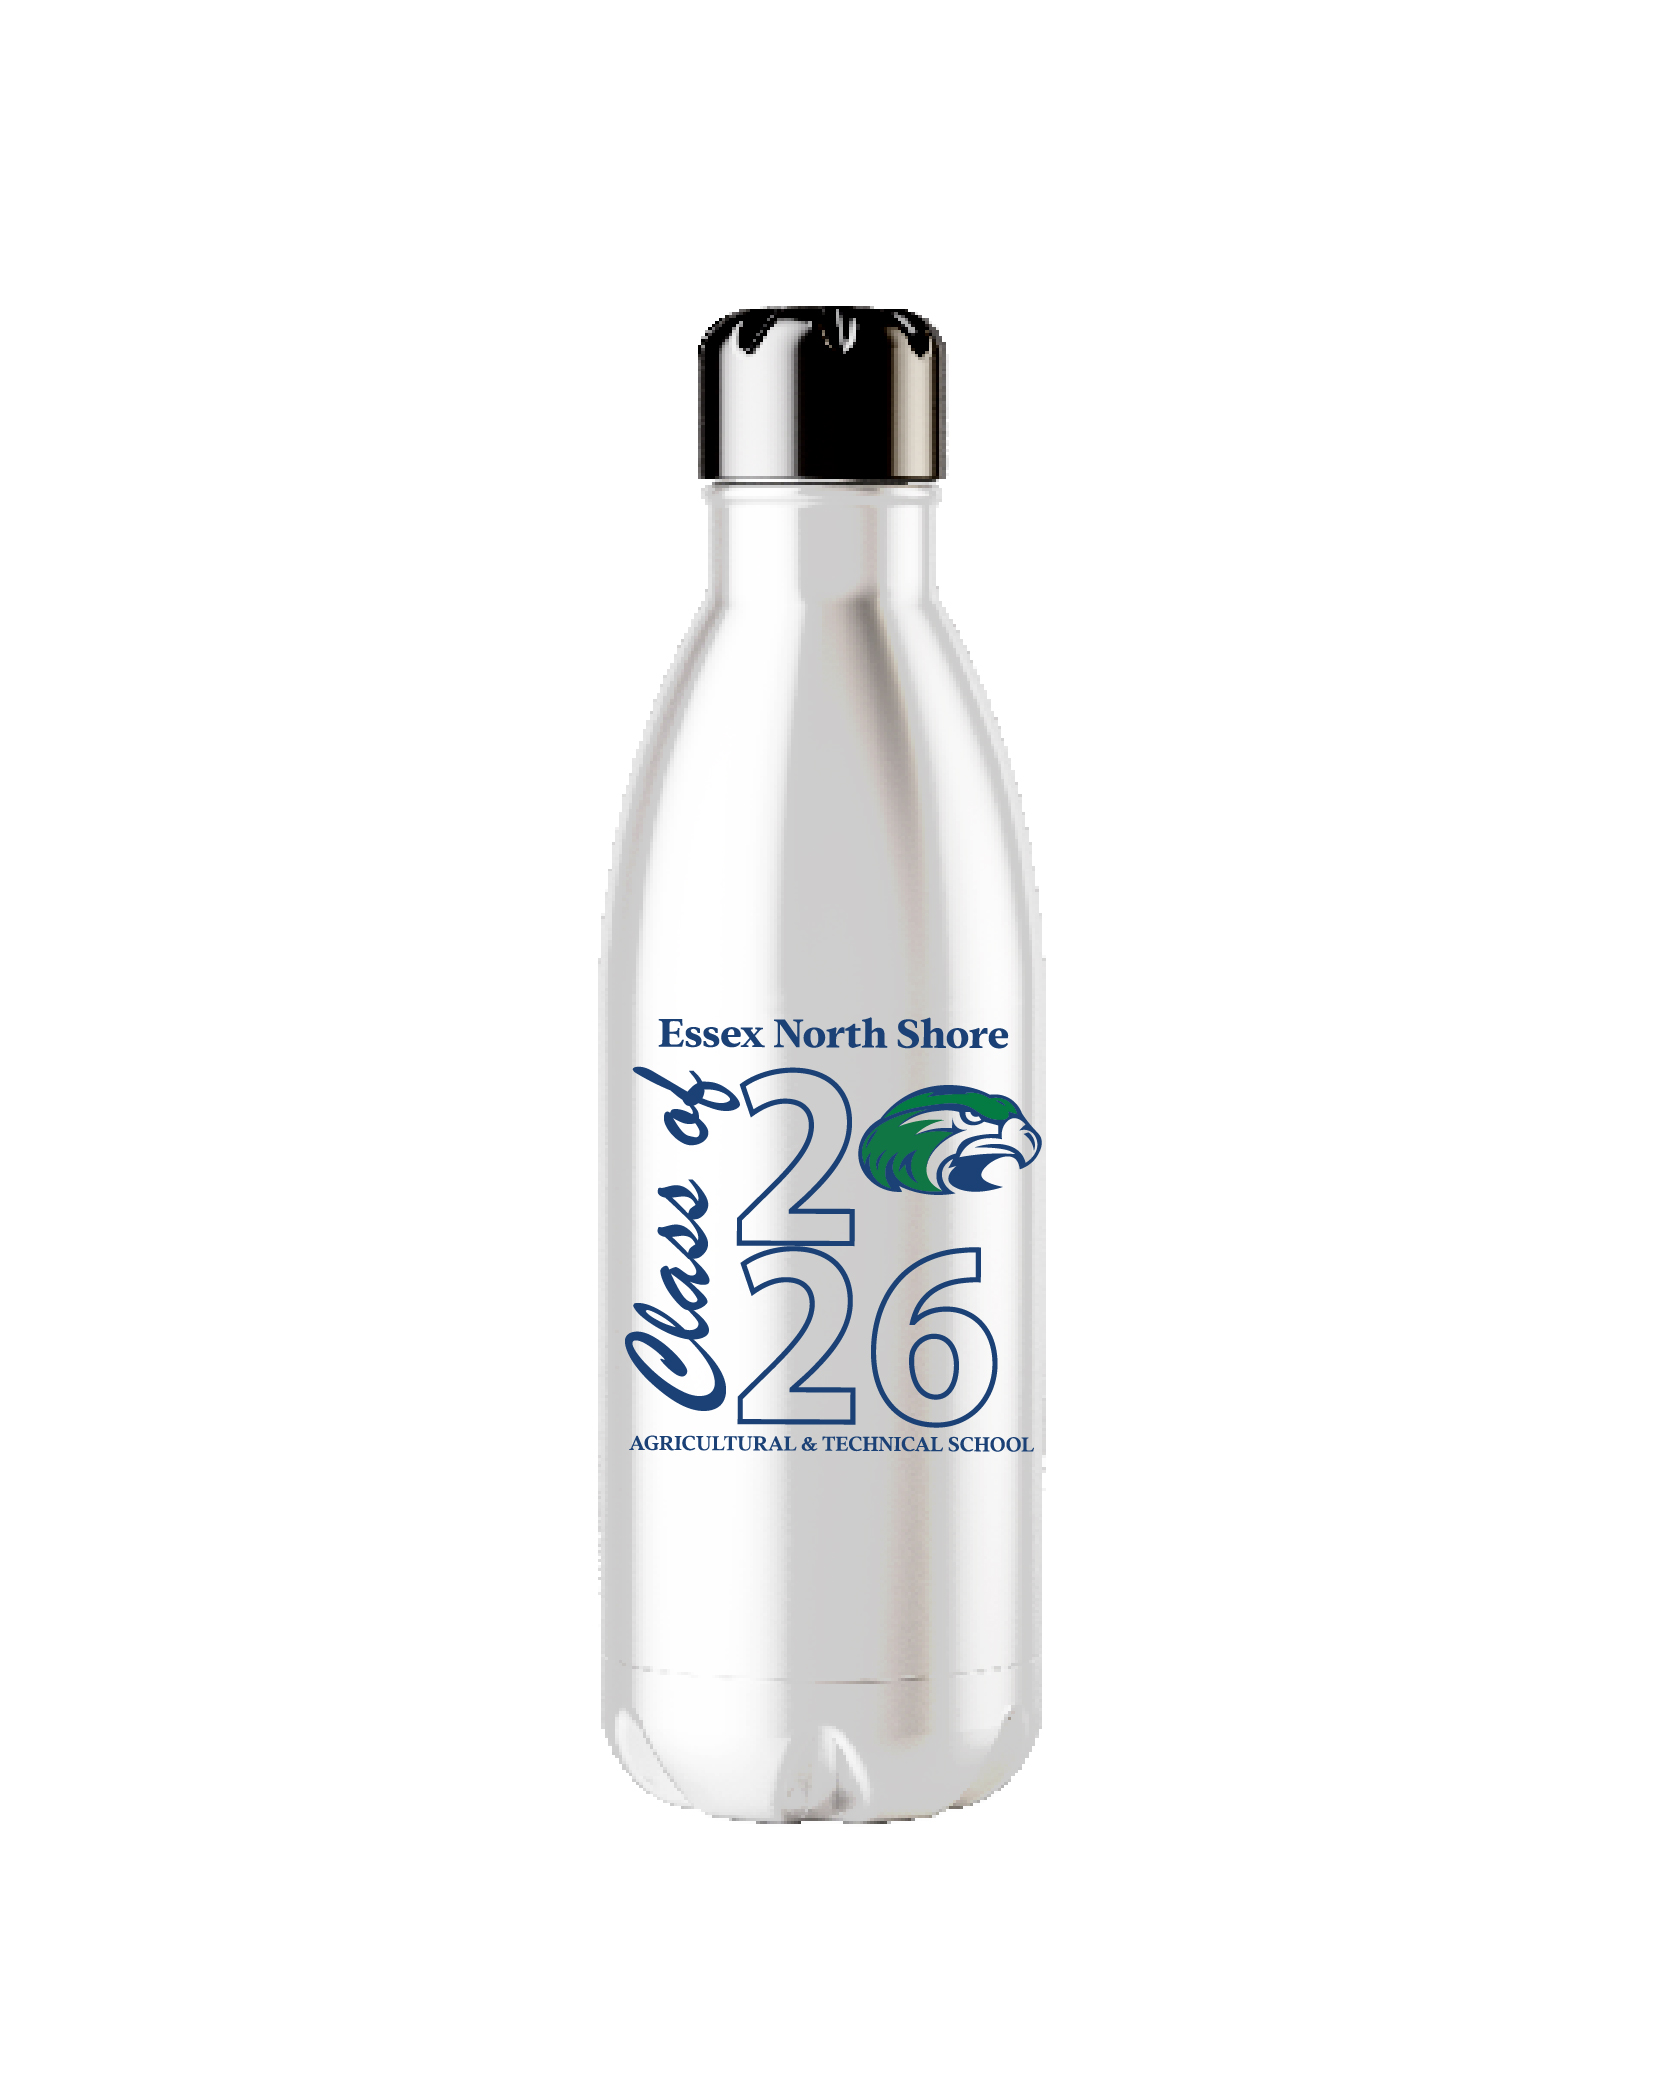 Essex North Shore PTO CLASS OF 2026 STAINLESS STEEL WATER BOTTLE - 17OZ